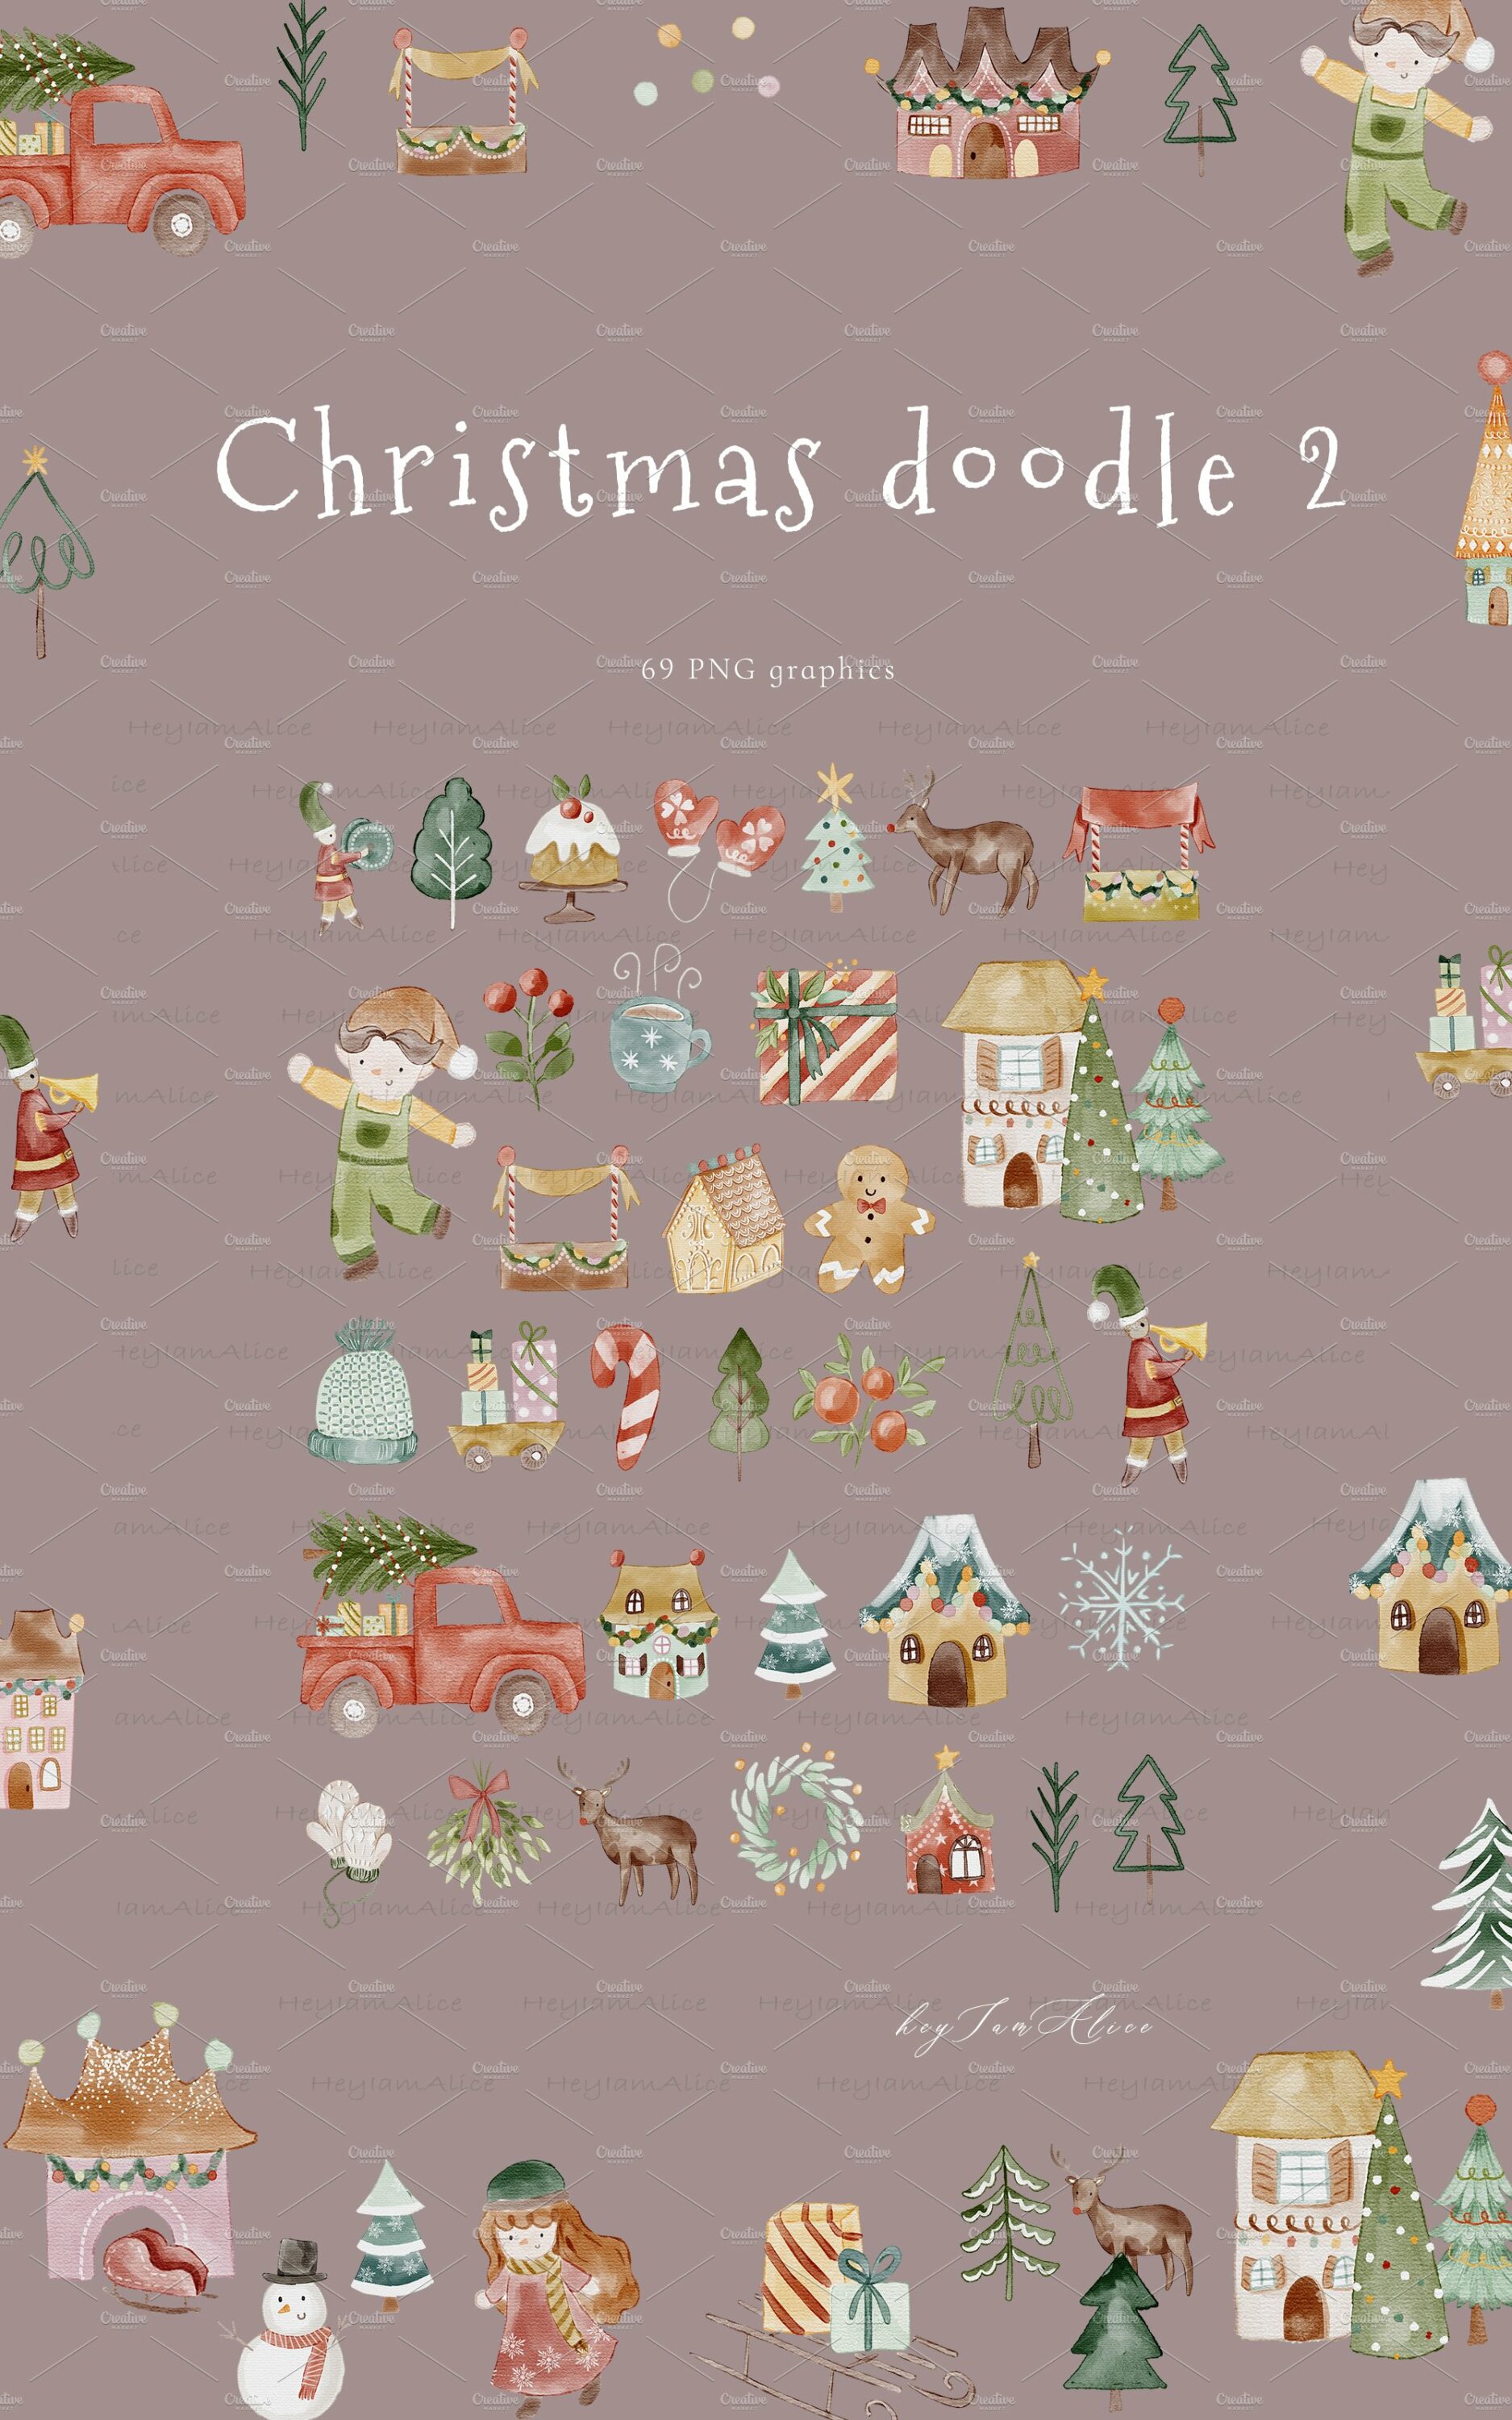 Cute pastel Christmas items for the festive mood.